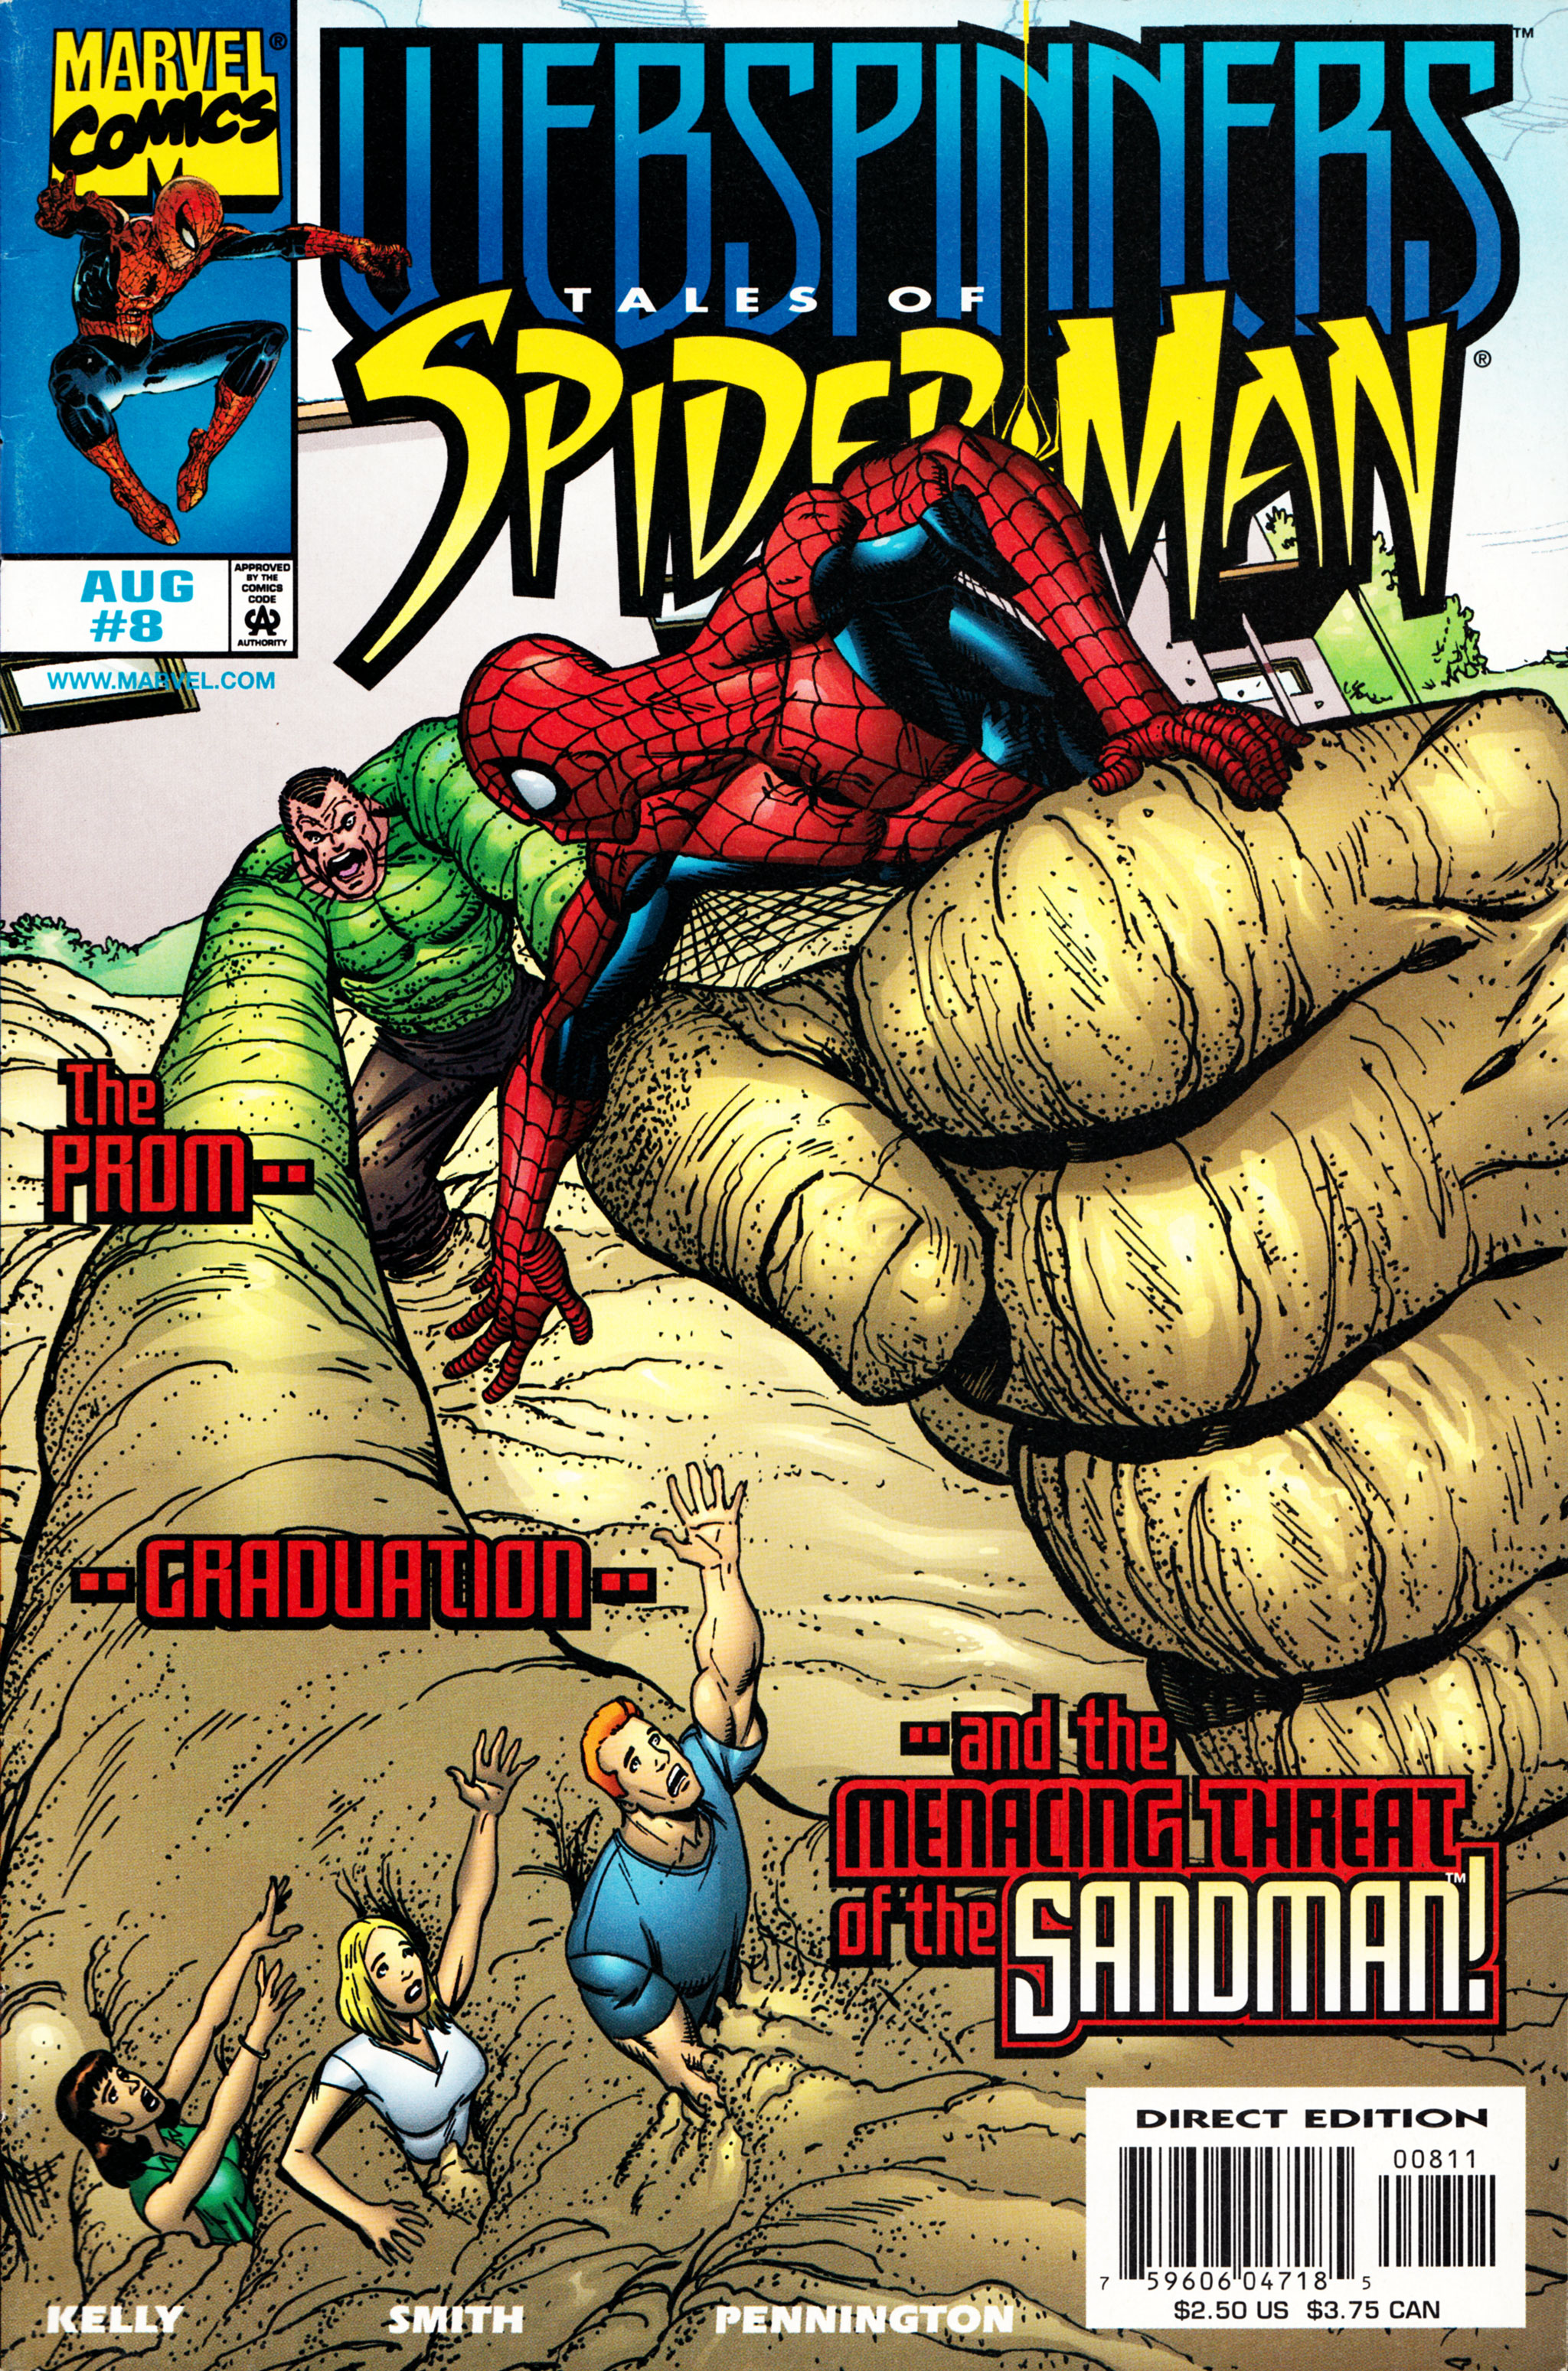 Read online Webspinners: Tales of Spider-Man comic -  Issue #8 - 1